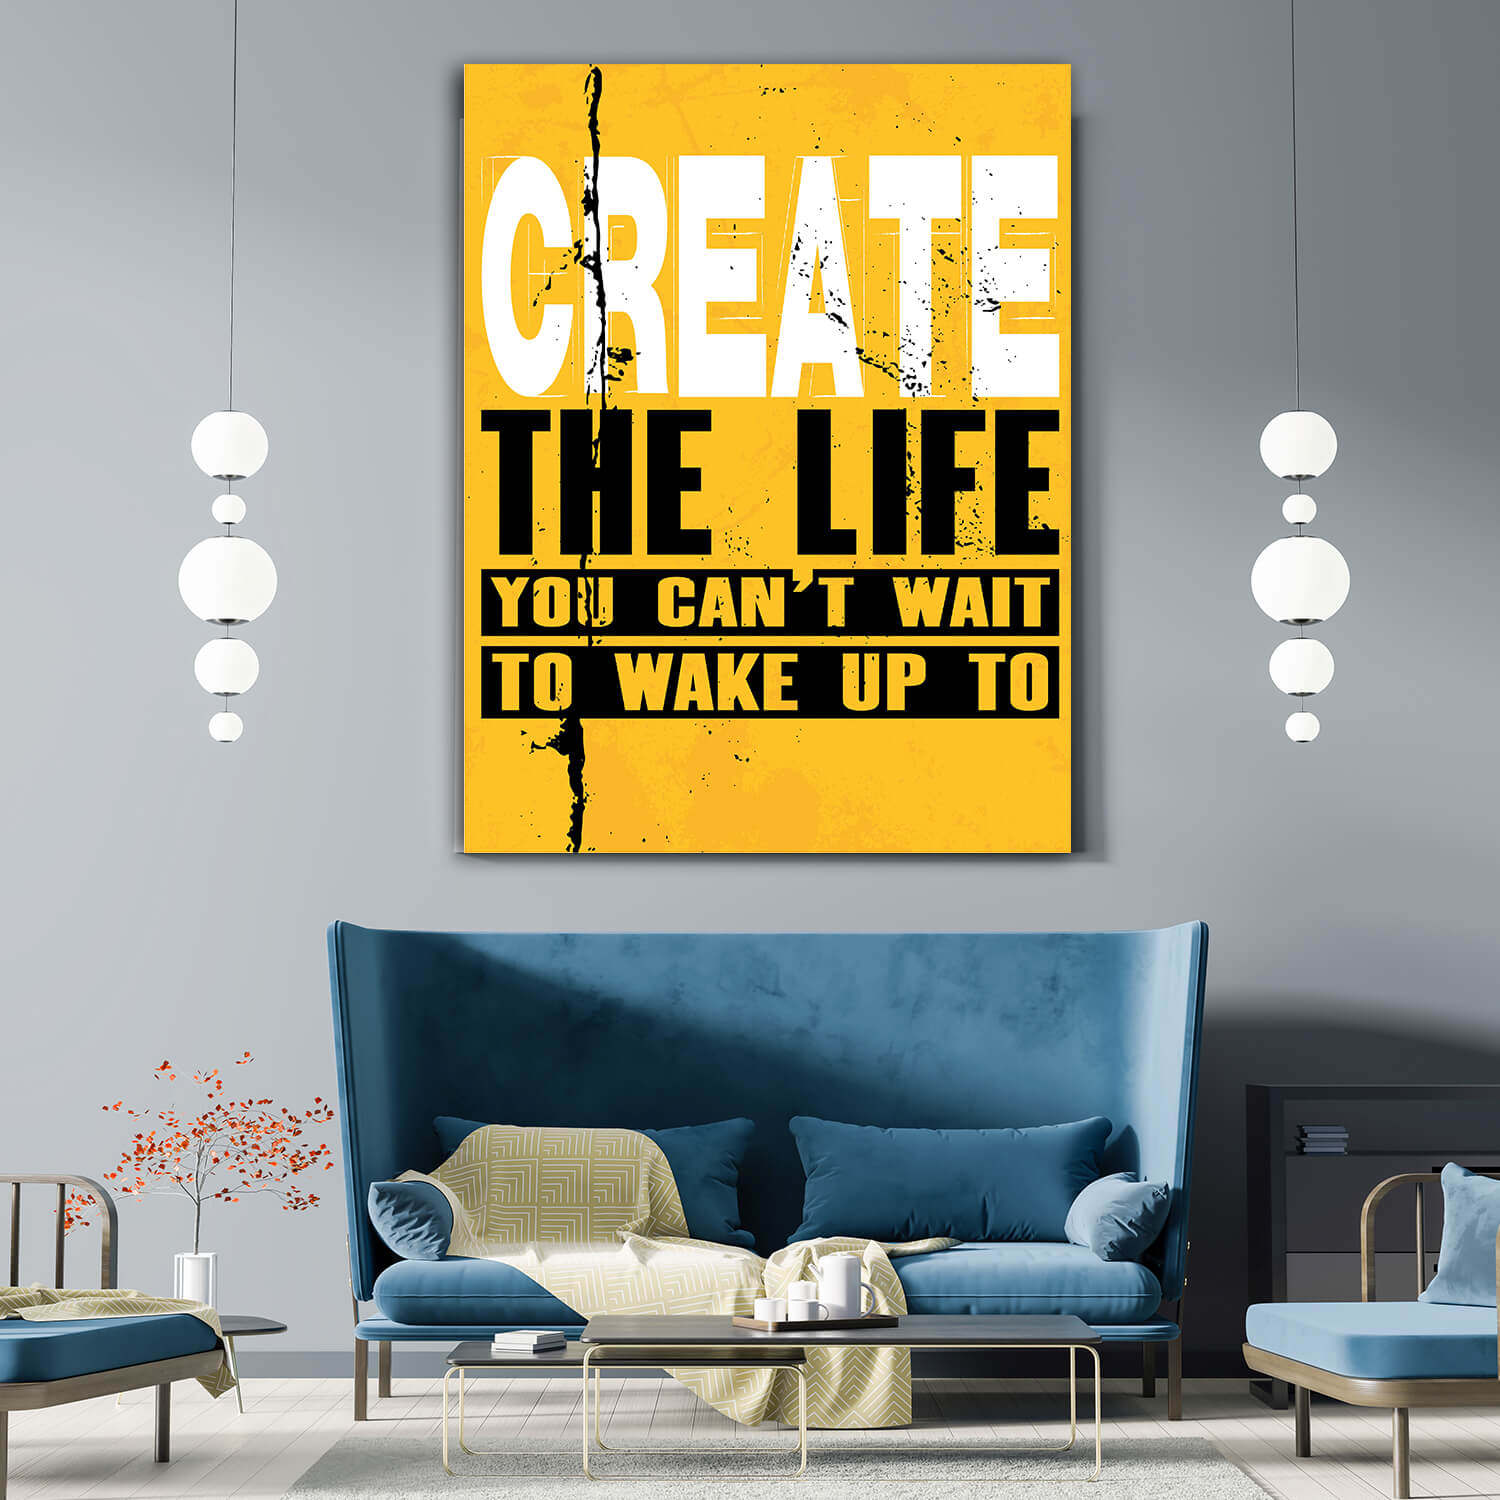 W1_0020_M&P_0012_PRINT__0021_32765824_CREATE THE LIFE YOU CAN NOT WAIT TO WAKE UP TO Motivation Quote AOA10834